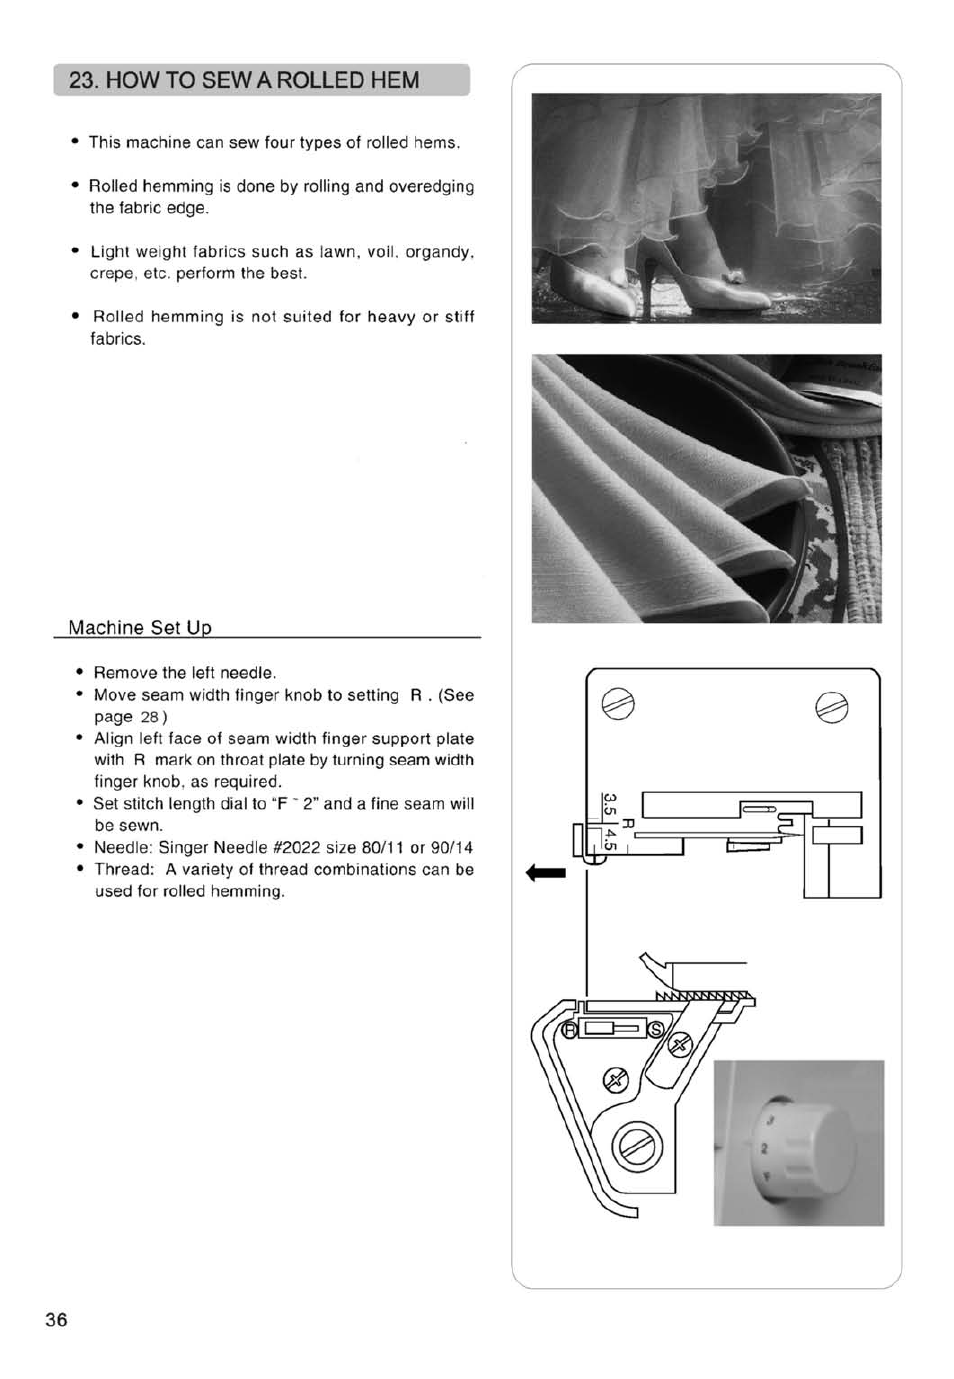 How to sew a rolled hem | SINGER 14SH754/14CG754 User Manual | Page 37 / 53